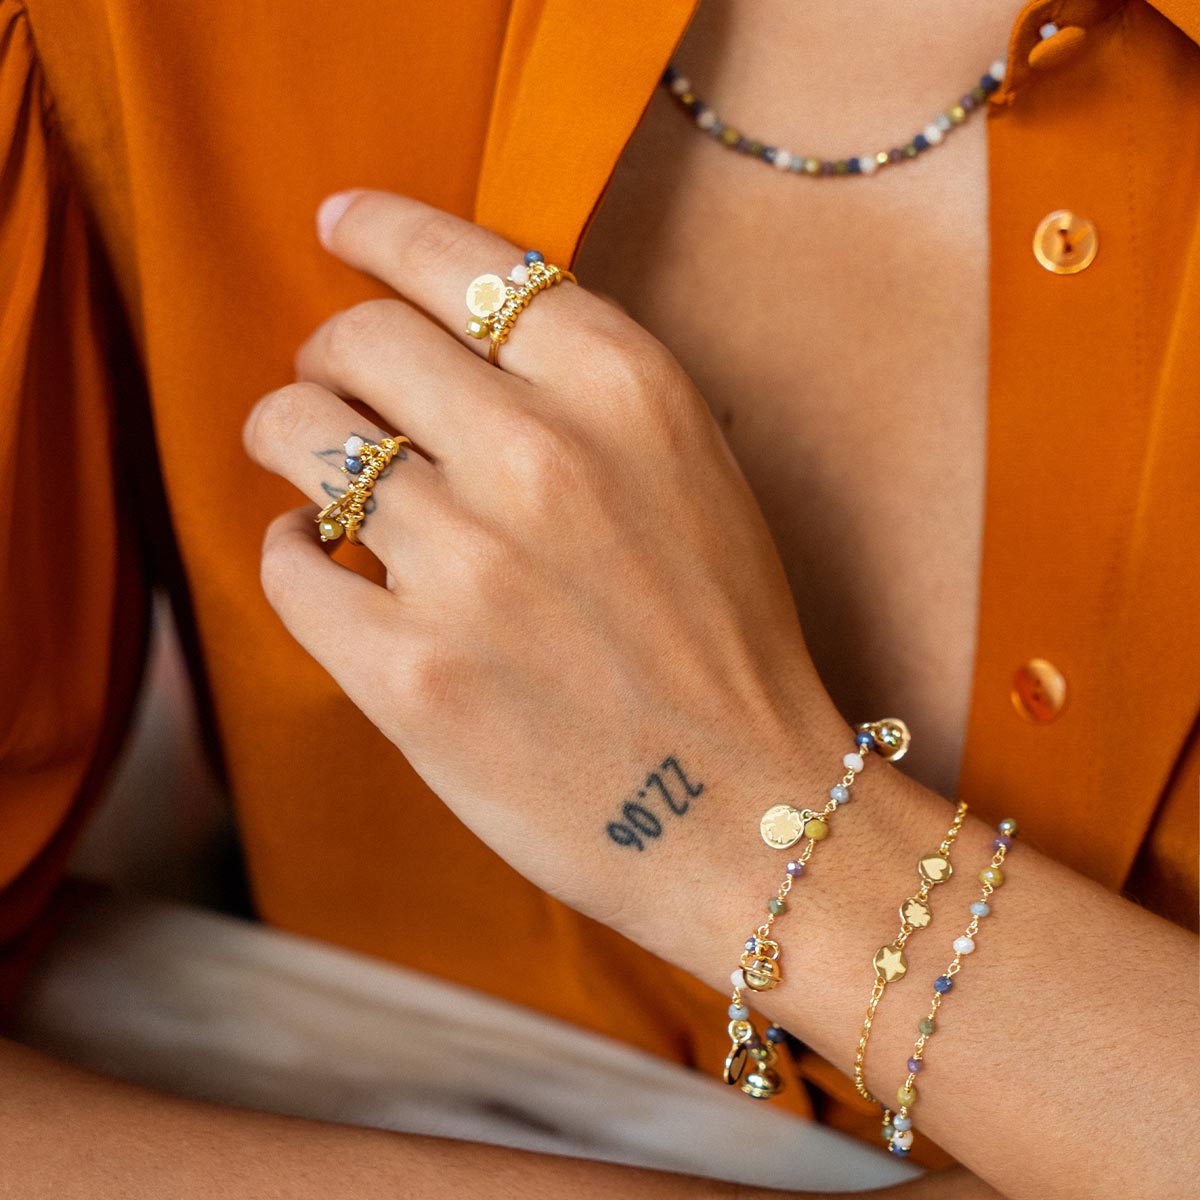 Rings - PENDANT MEDALS RING - GIPSY TIERRA - 3 | Rue des Mille